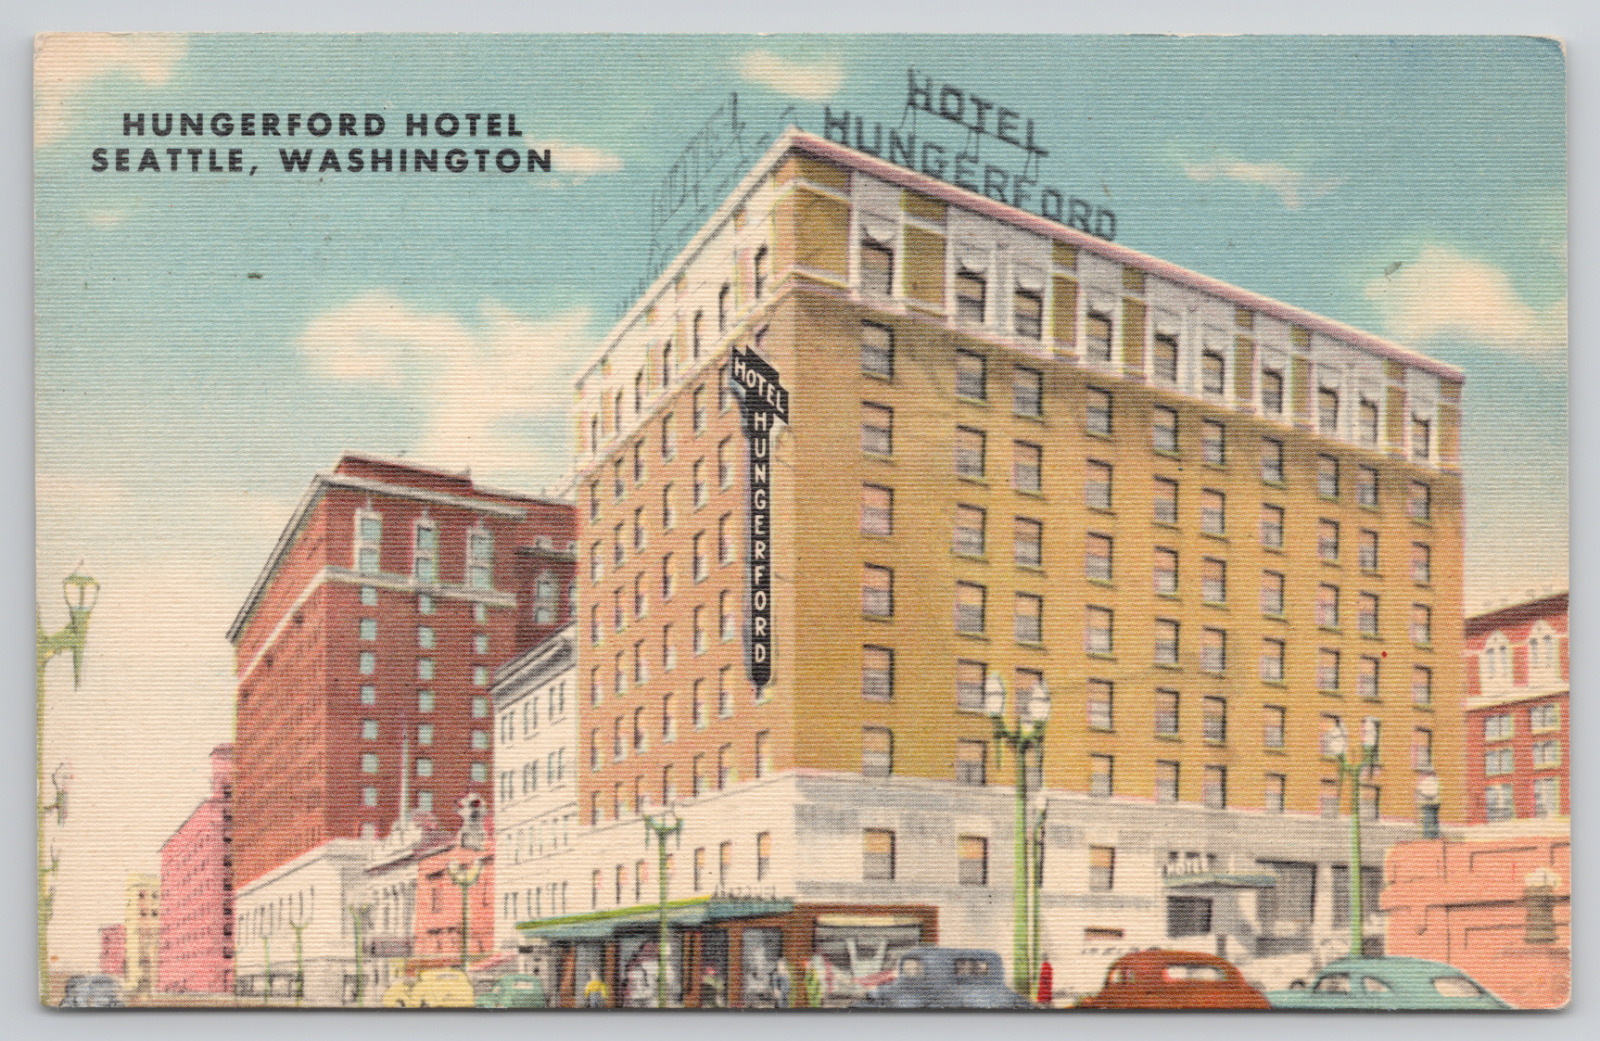 Seattle Washington Hungerford Hotel Posted 1949 Linen Postcard